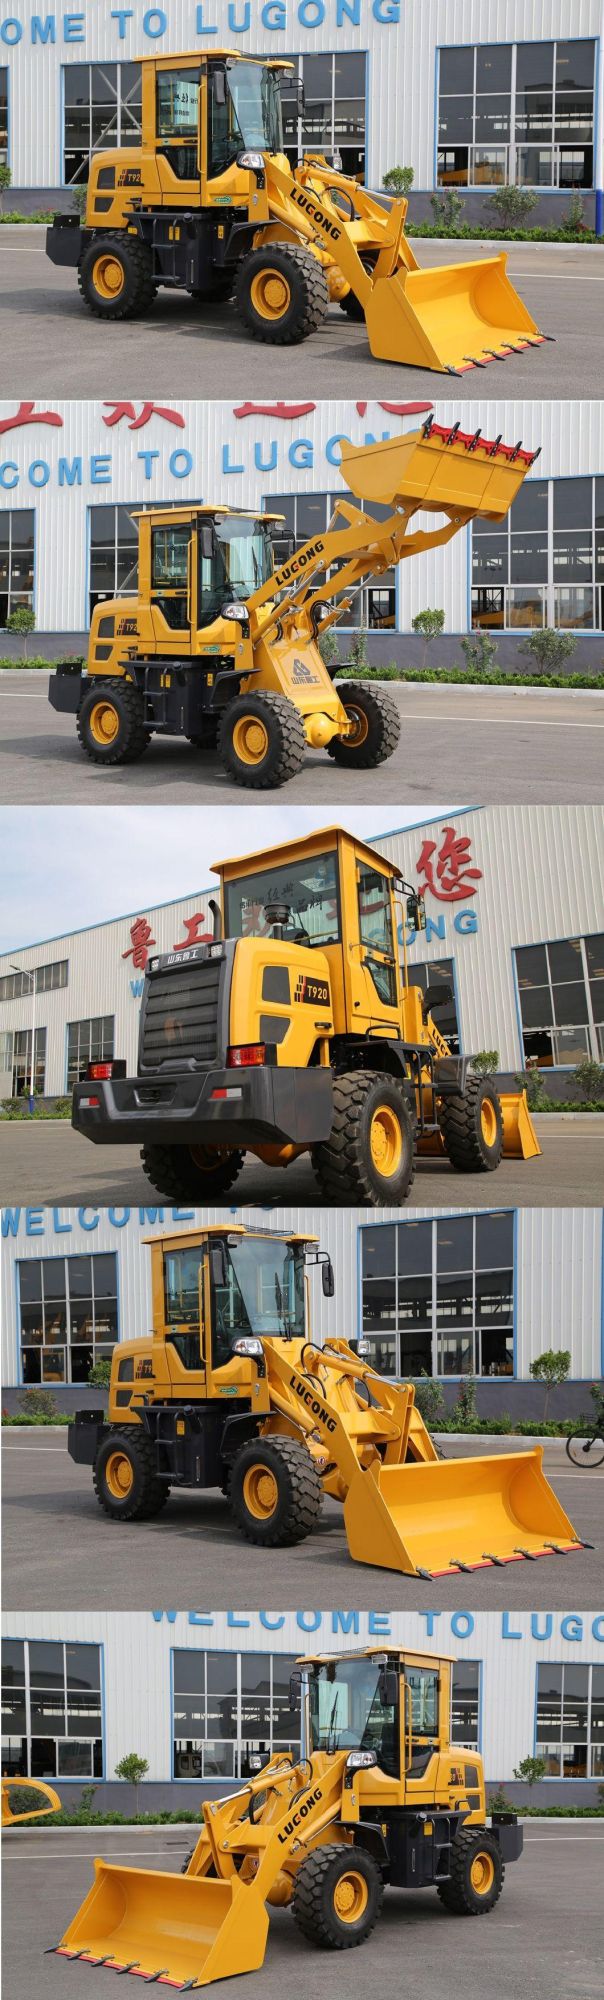 Lugong Compact Front End Loader with Multi-Function for Garden Work